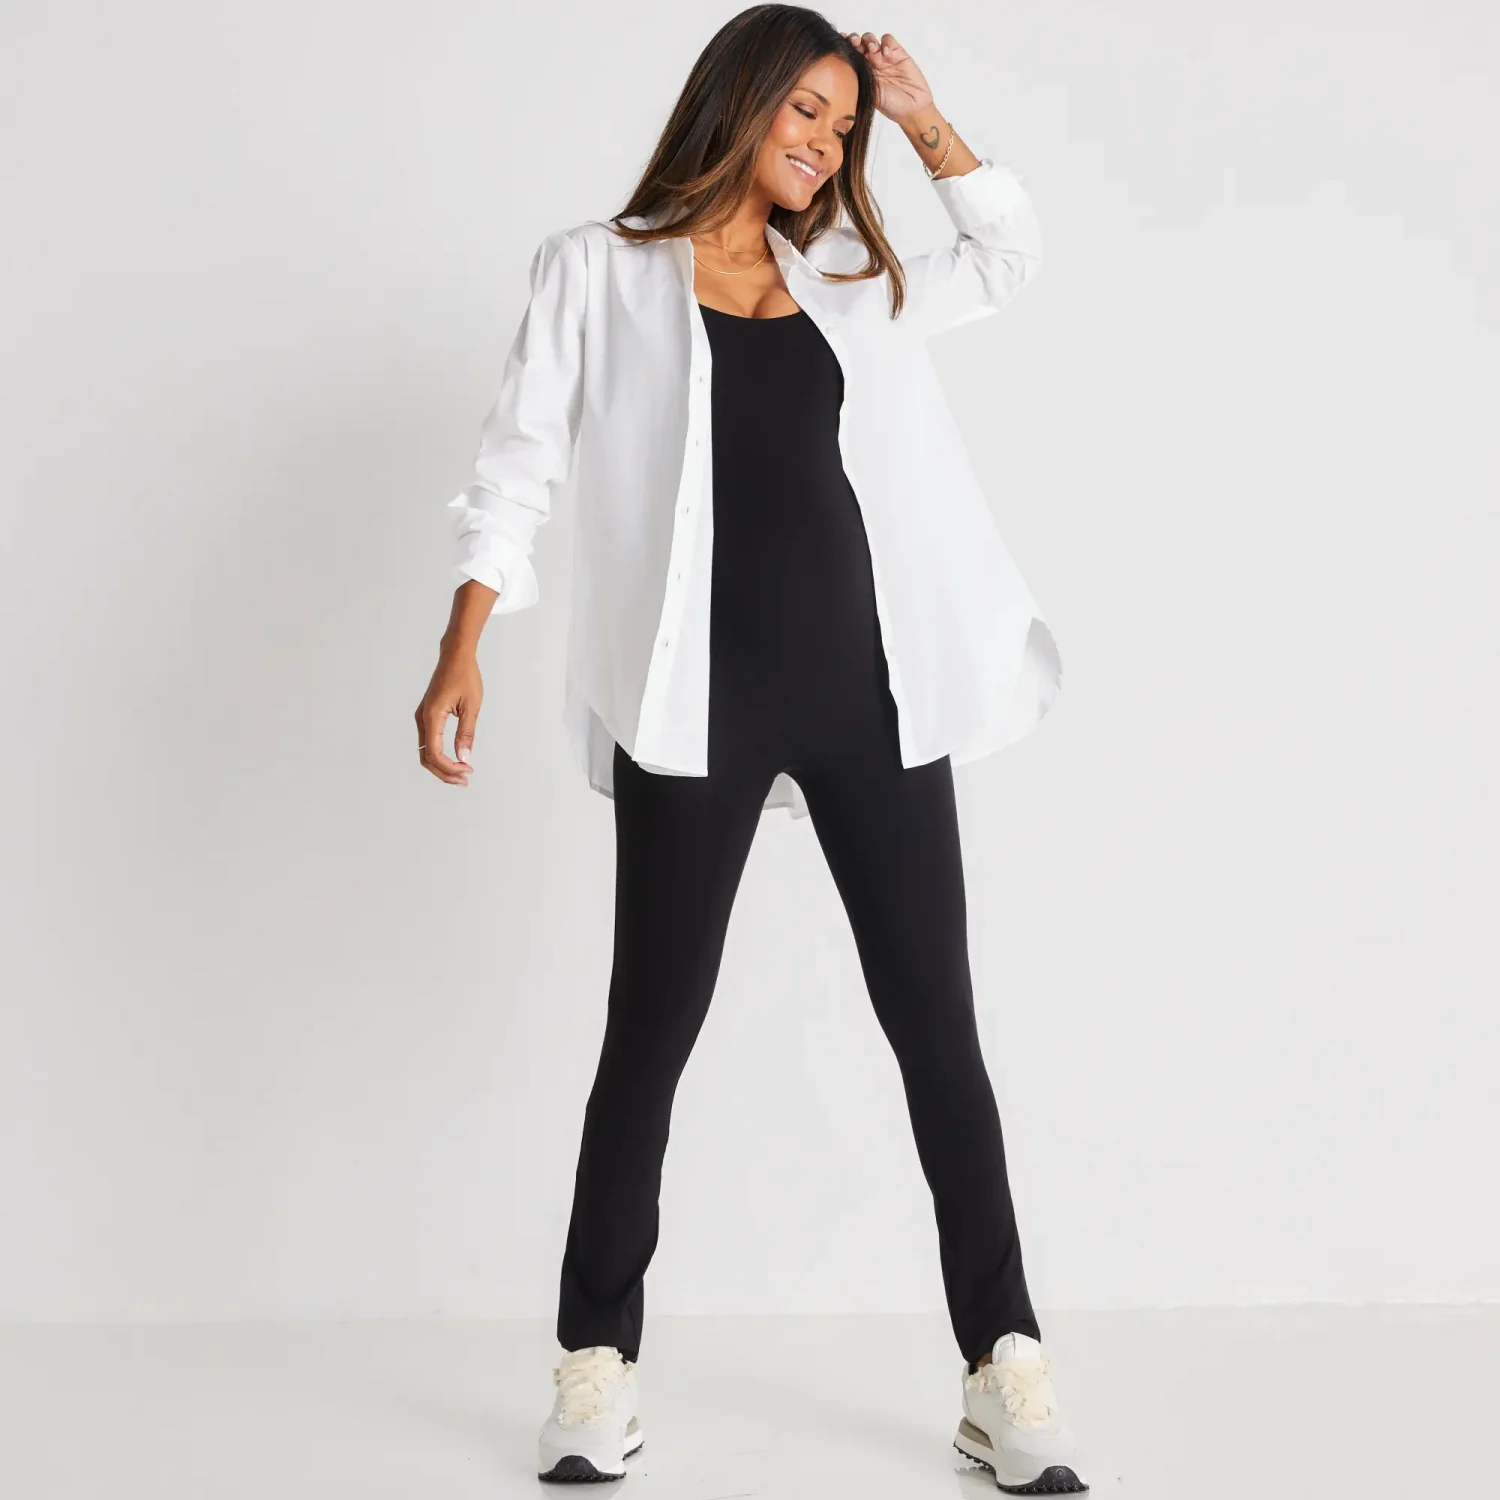 Hatch brand contemporary and stylish maternity friendly white button down shirts